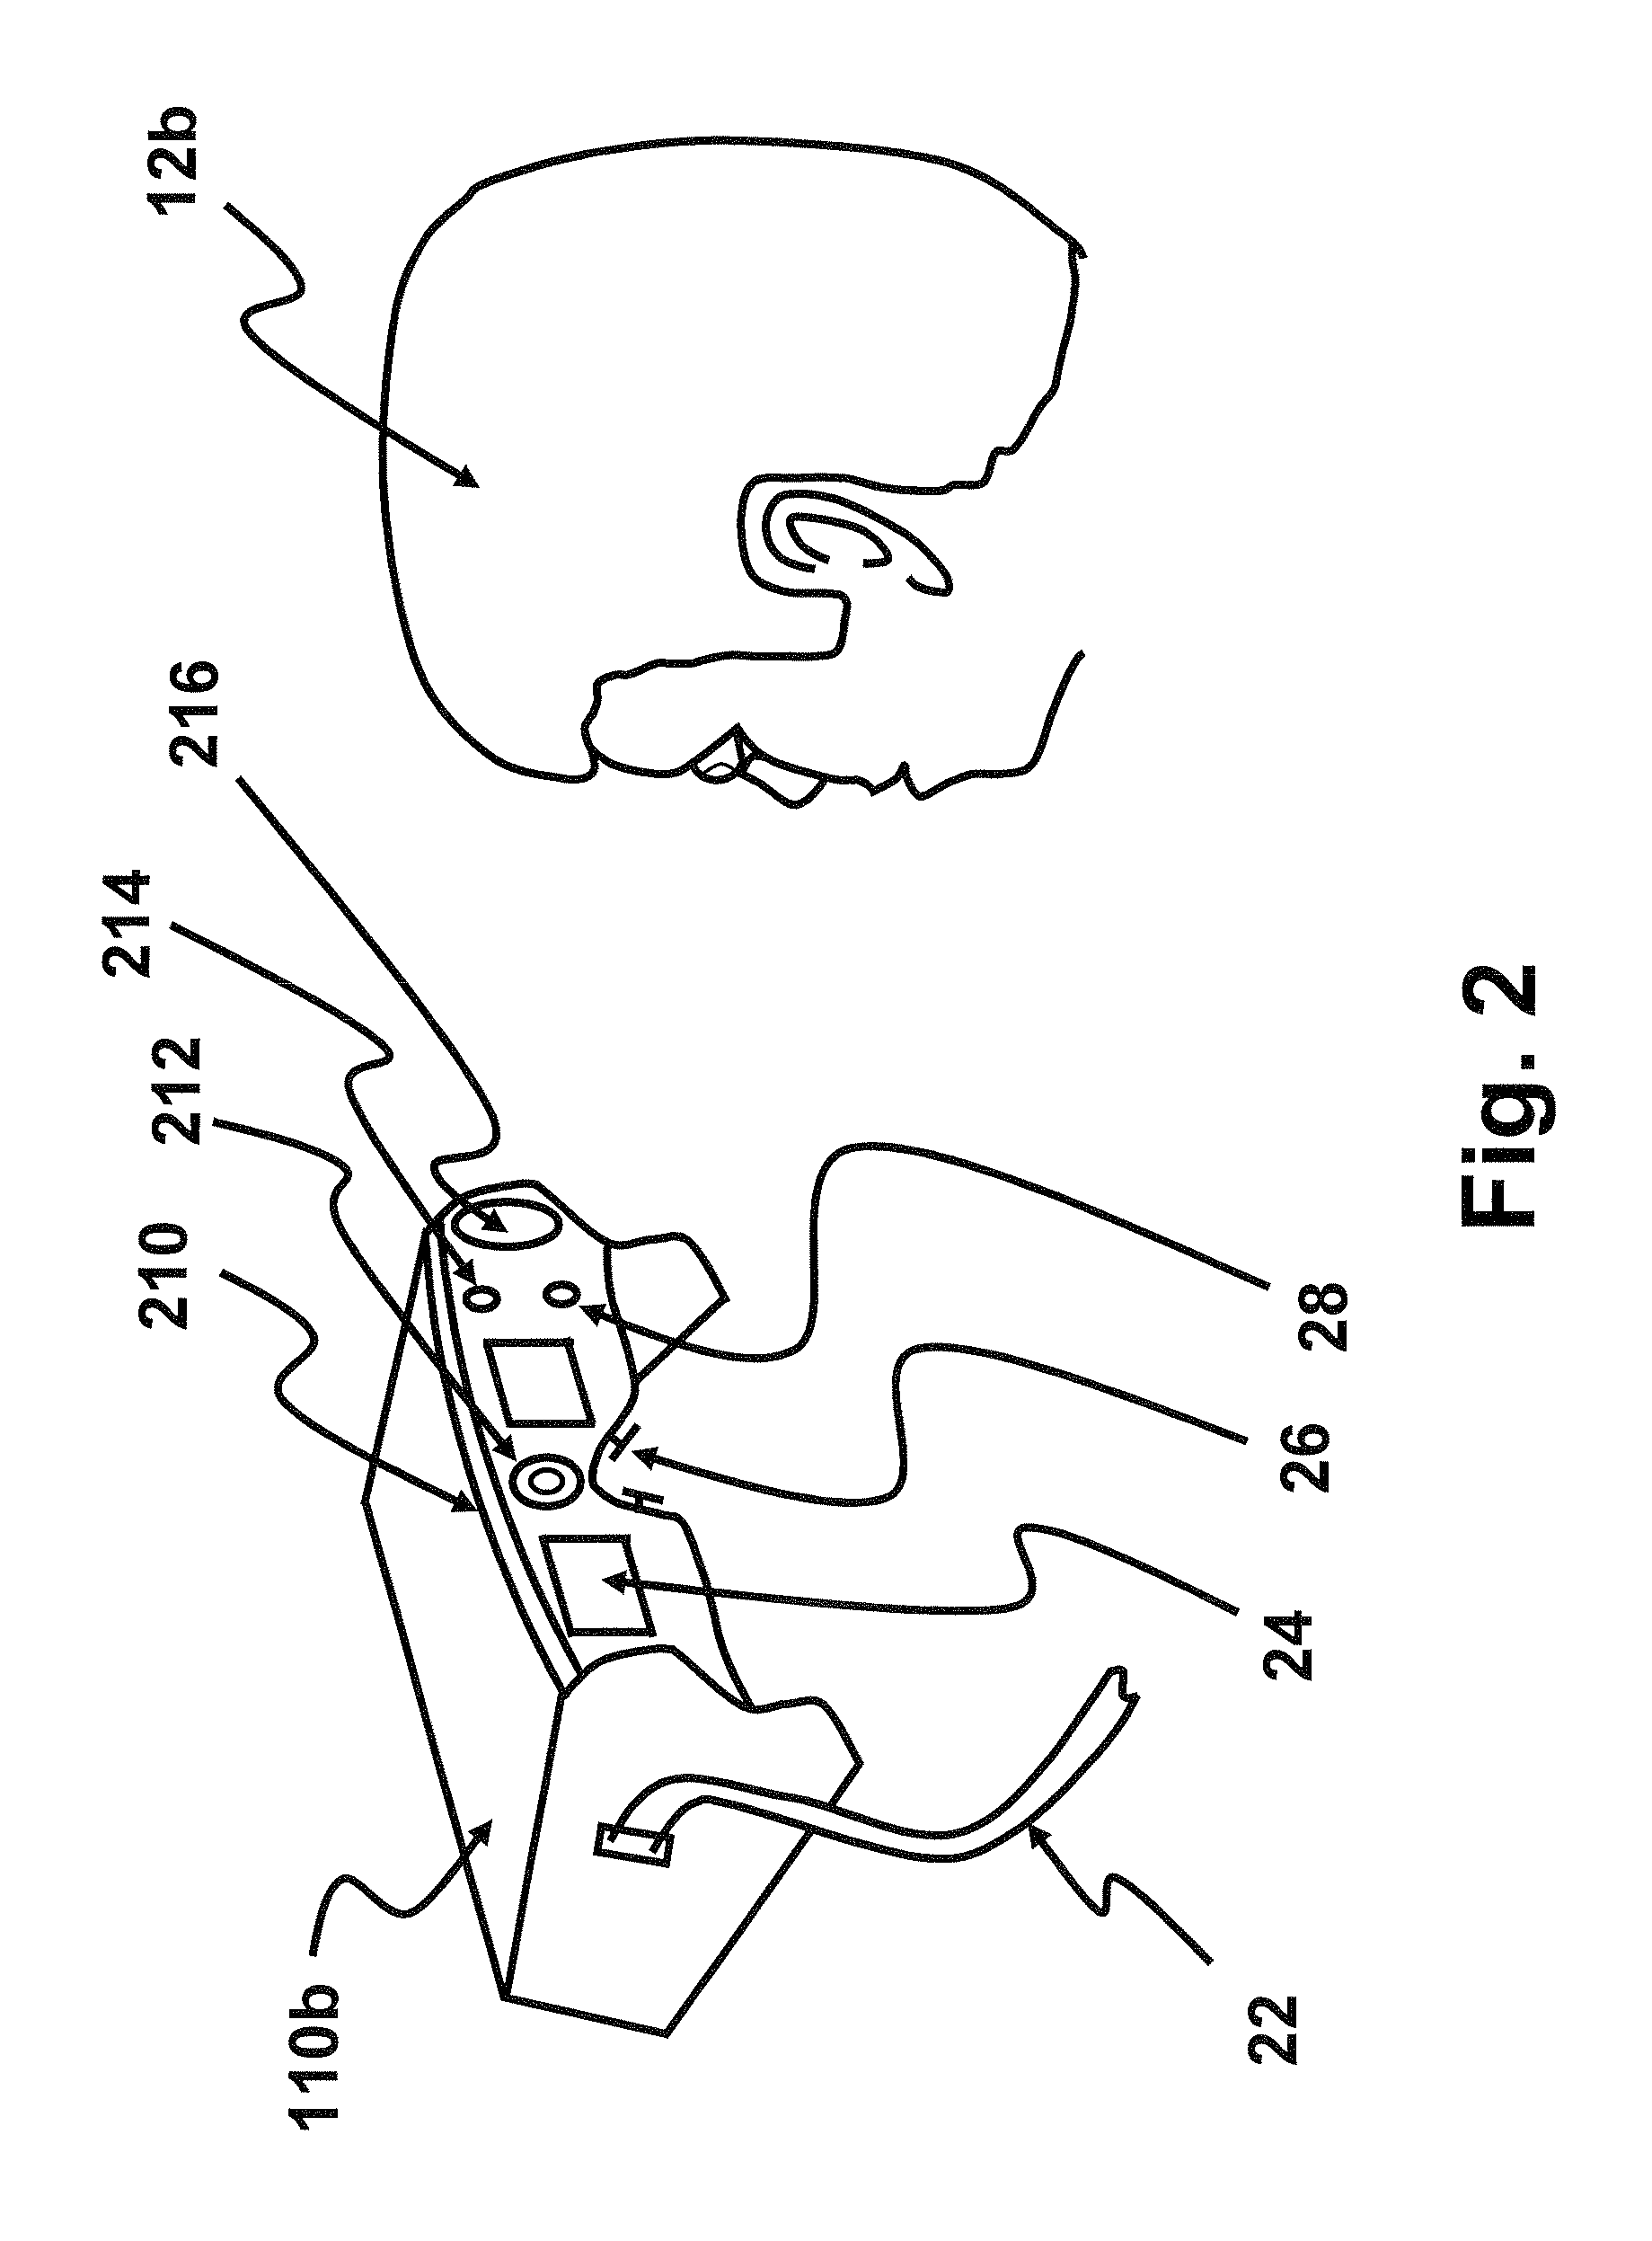 Vision Measurement and Training System and Method of Operation Thereof